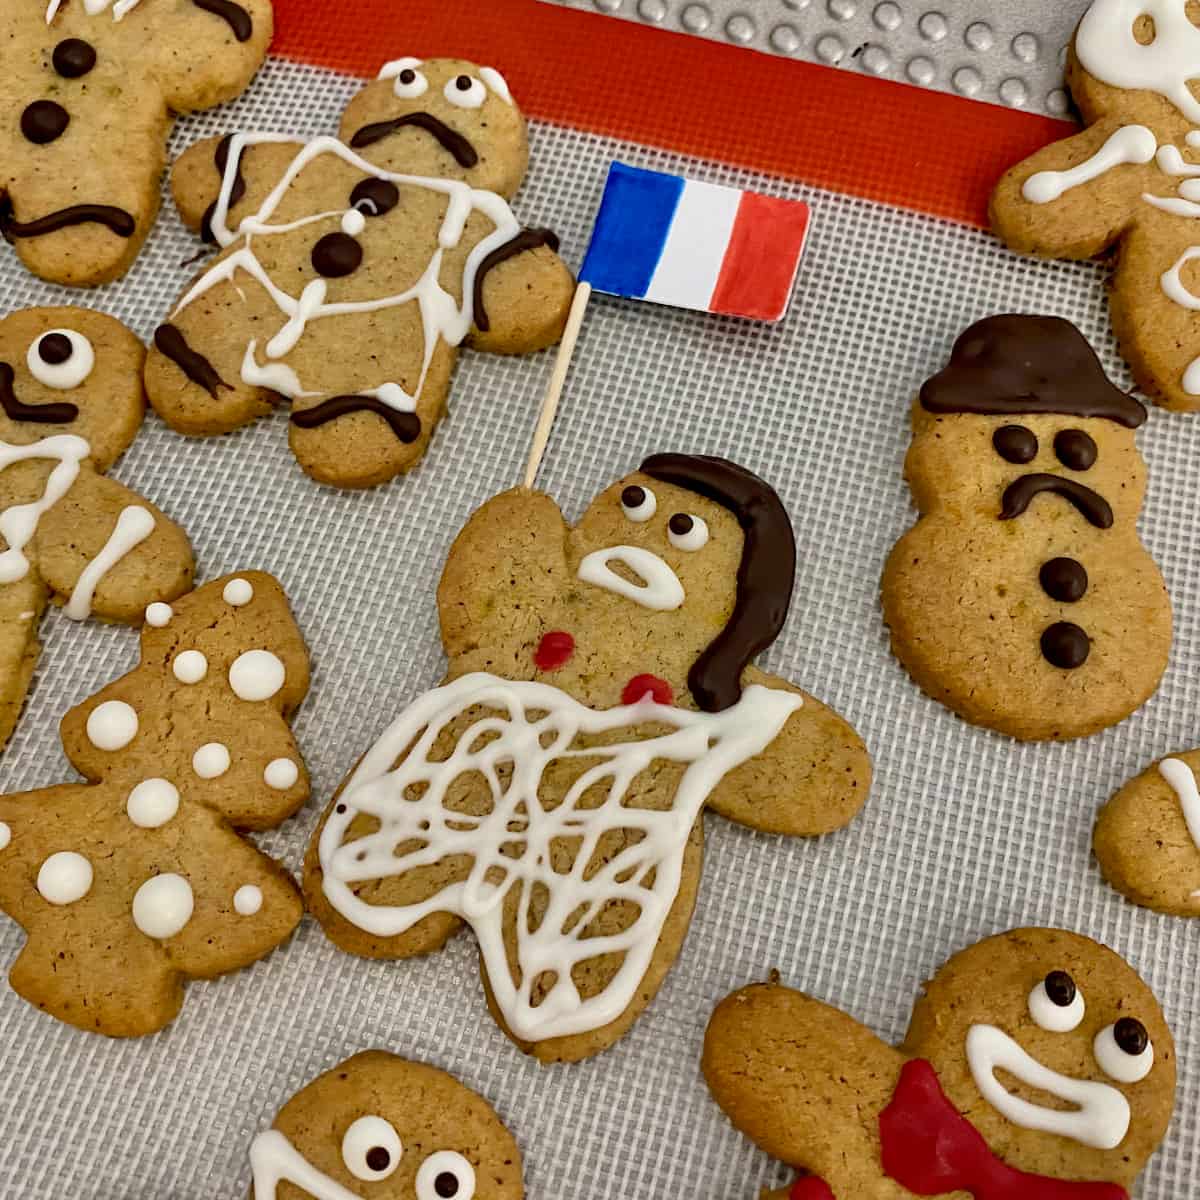 French Marianne decorated cookie holding a French flag surrounded by other gingerbread men